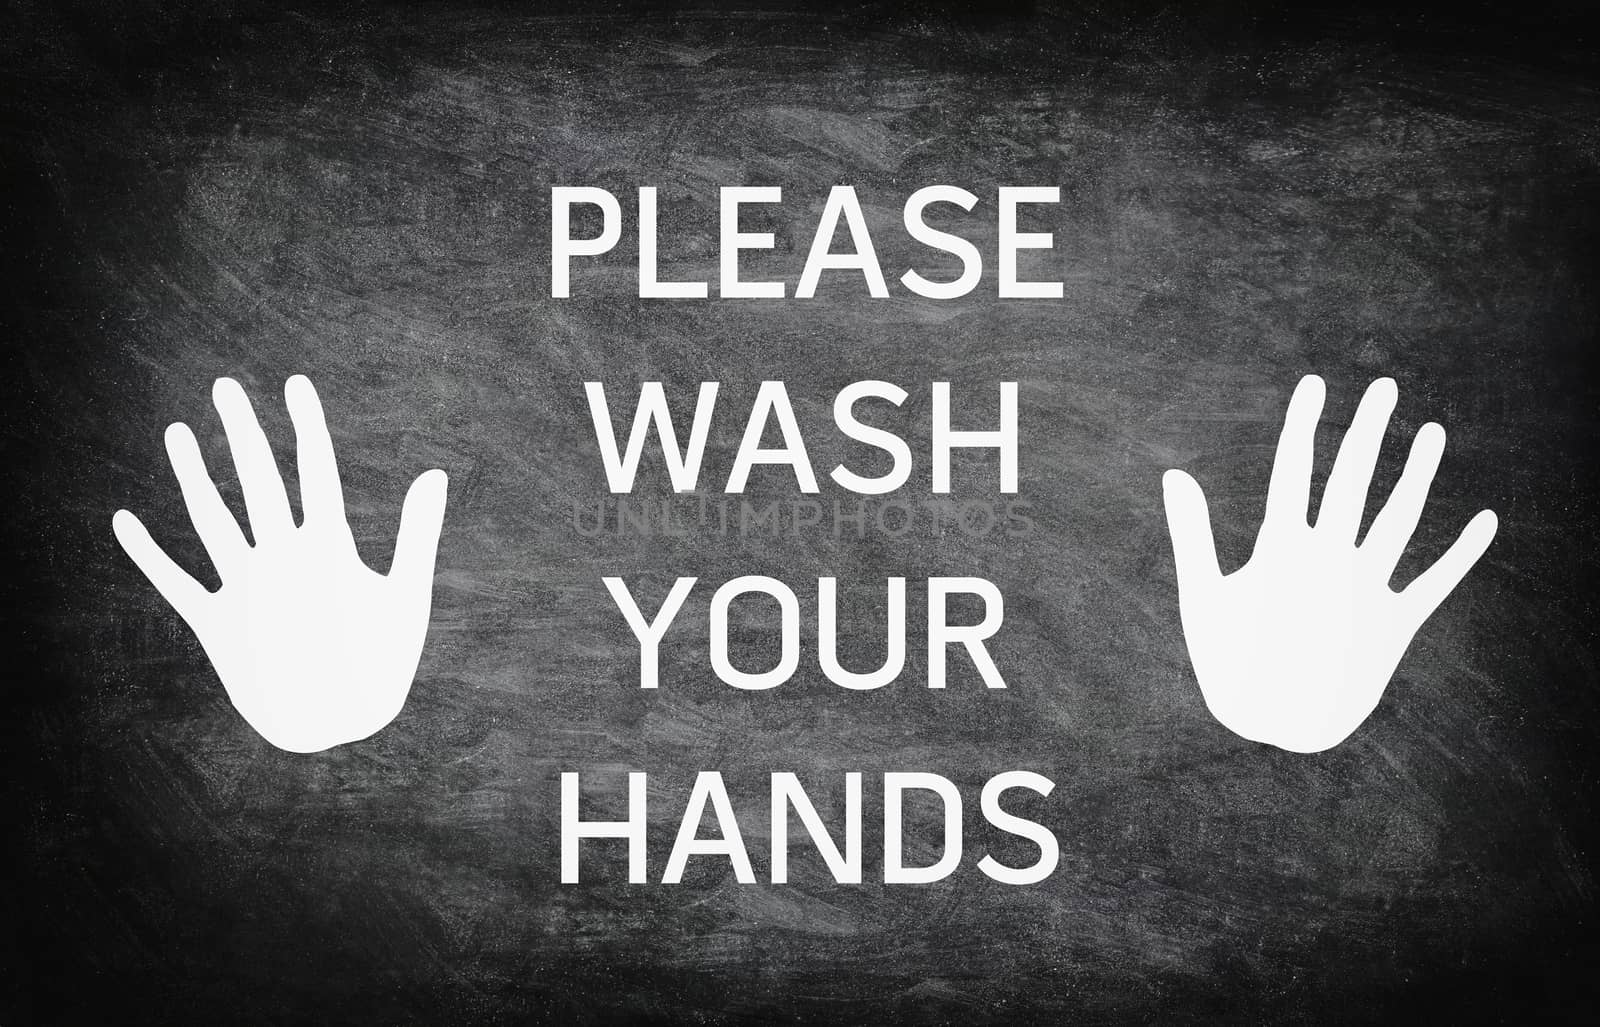 Please wash your hands notice warning at entrance sign on blackboard. Hands icon for handwashing by Maridav